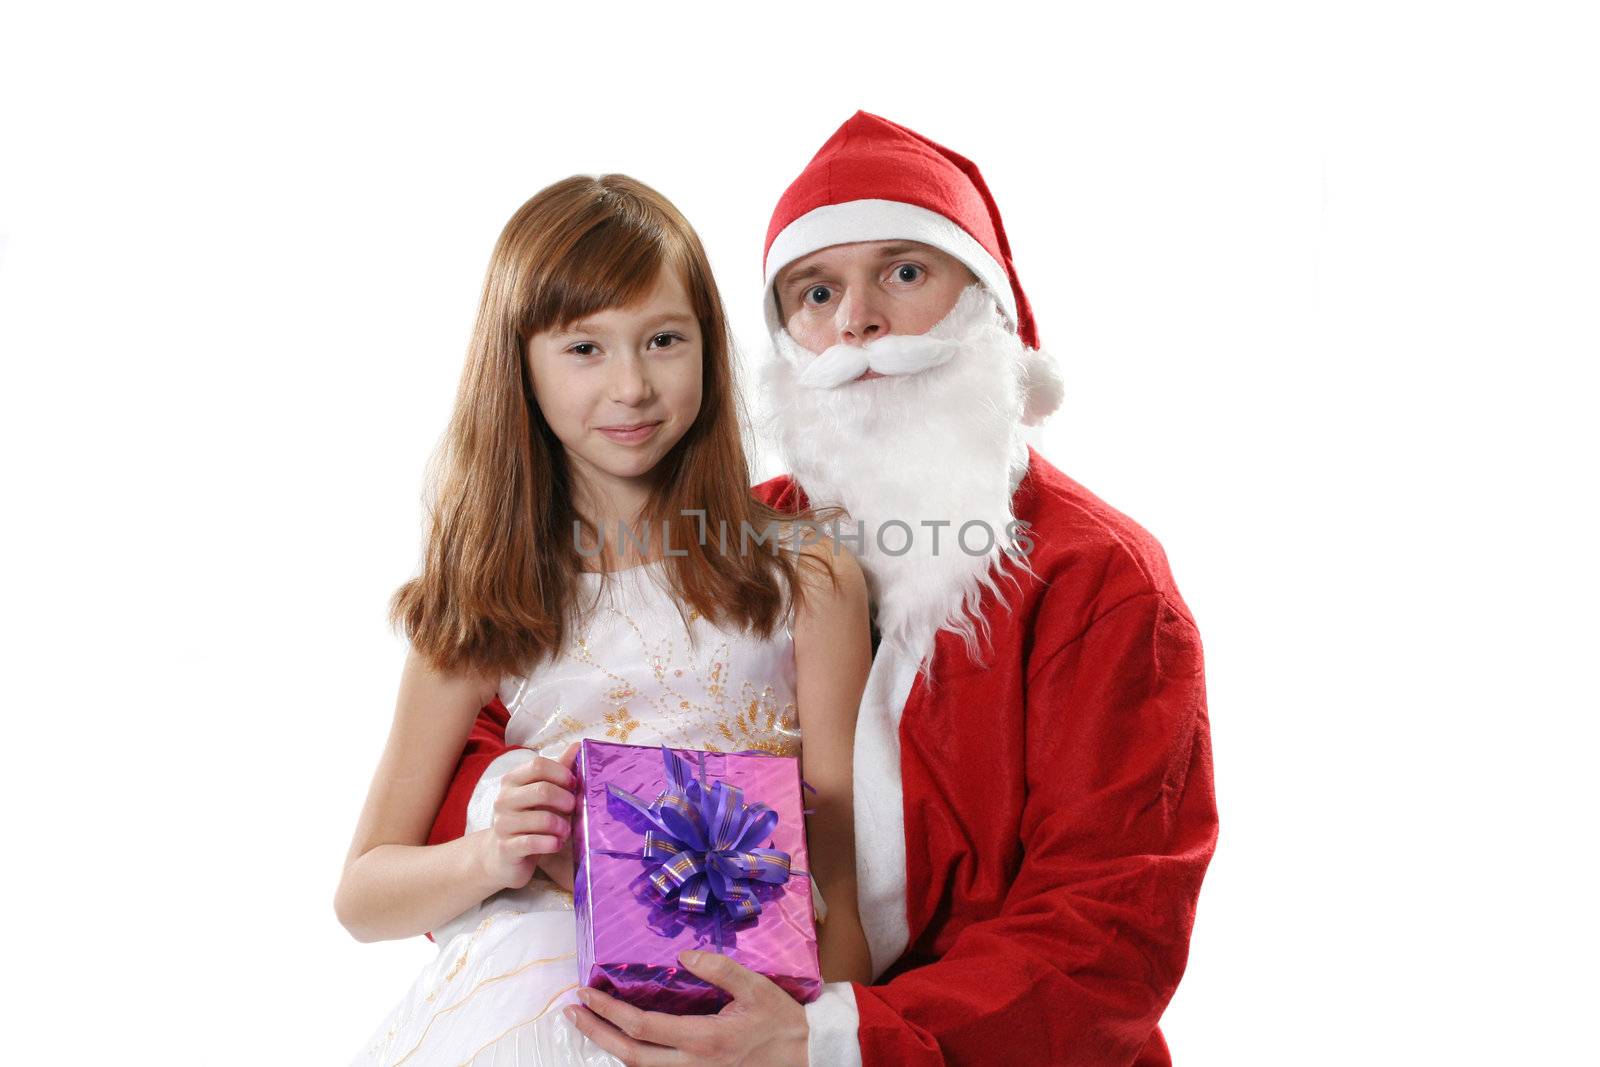 Santa together the girl and a gift on a white background